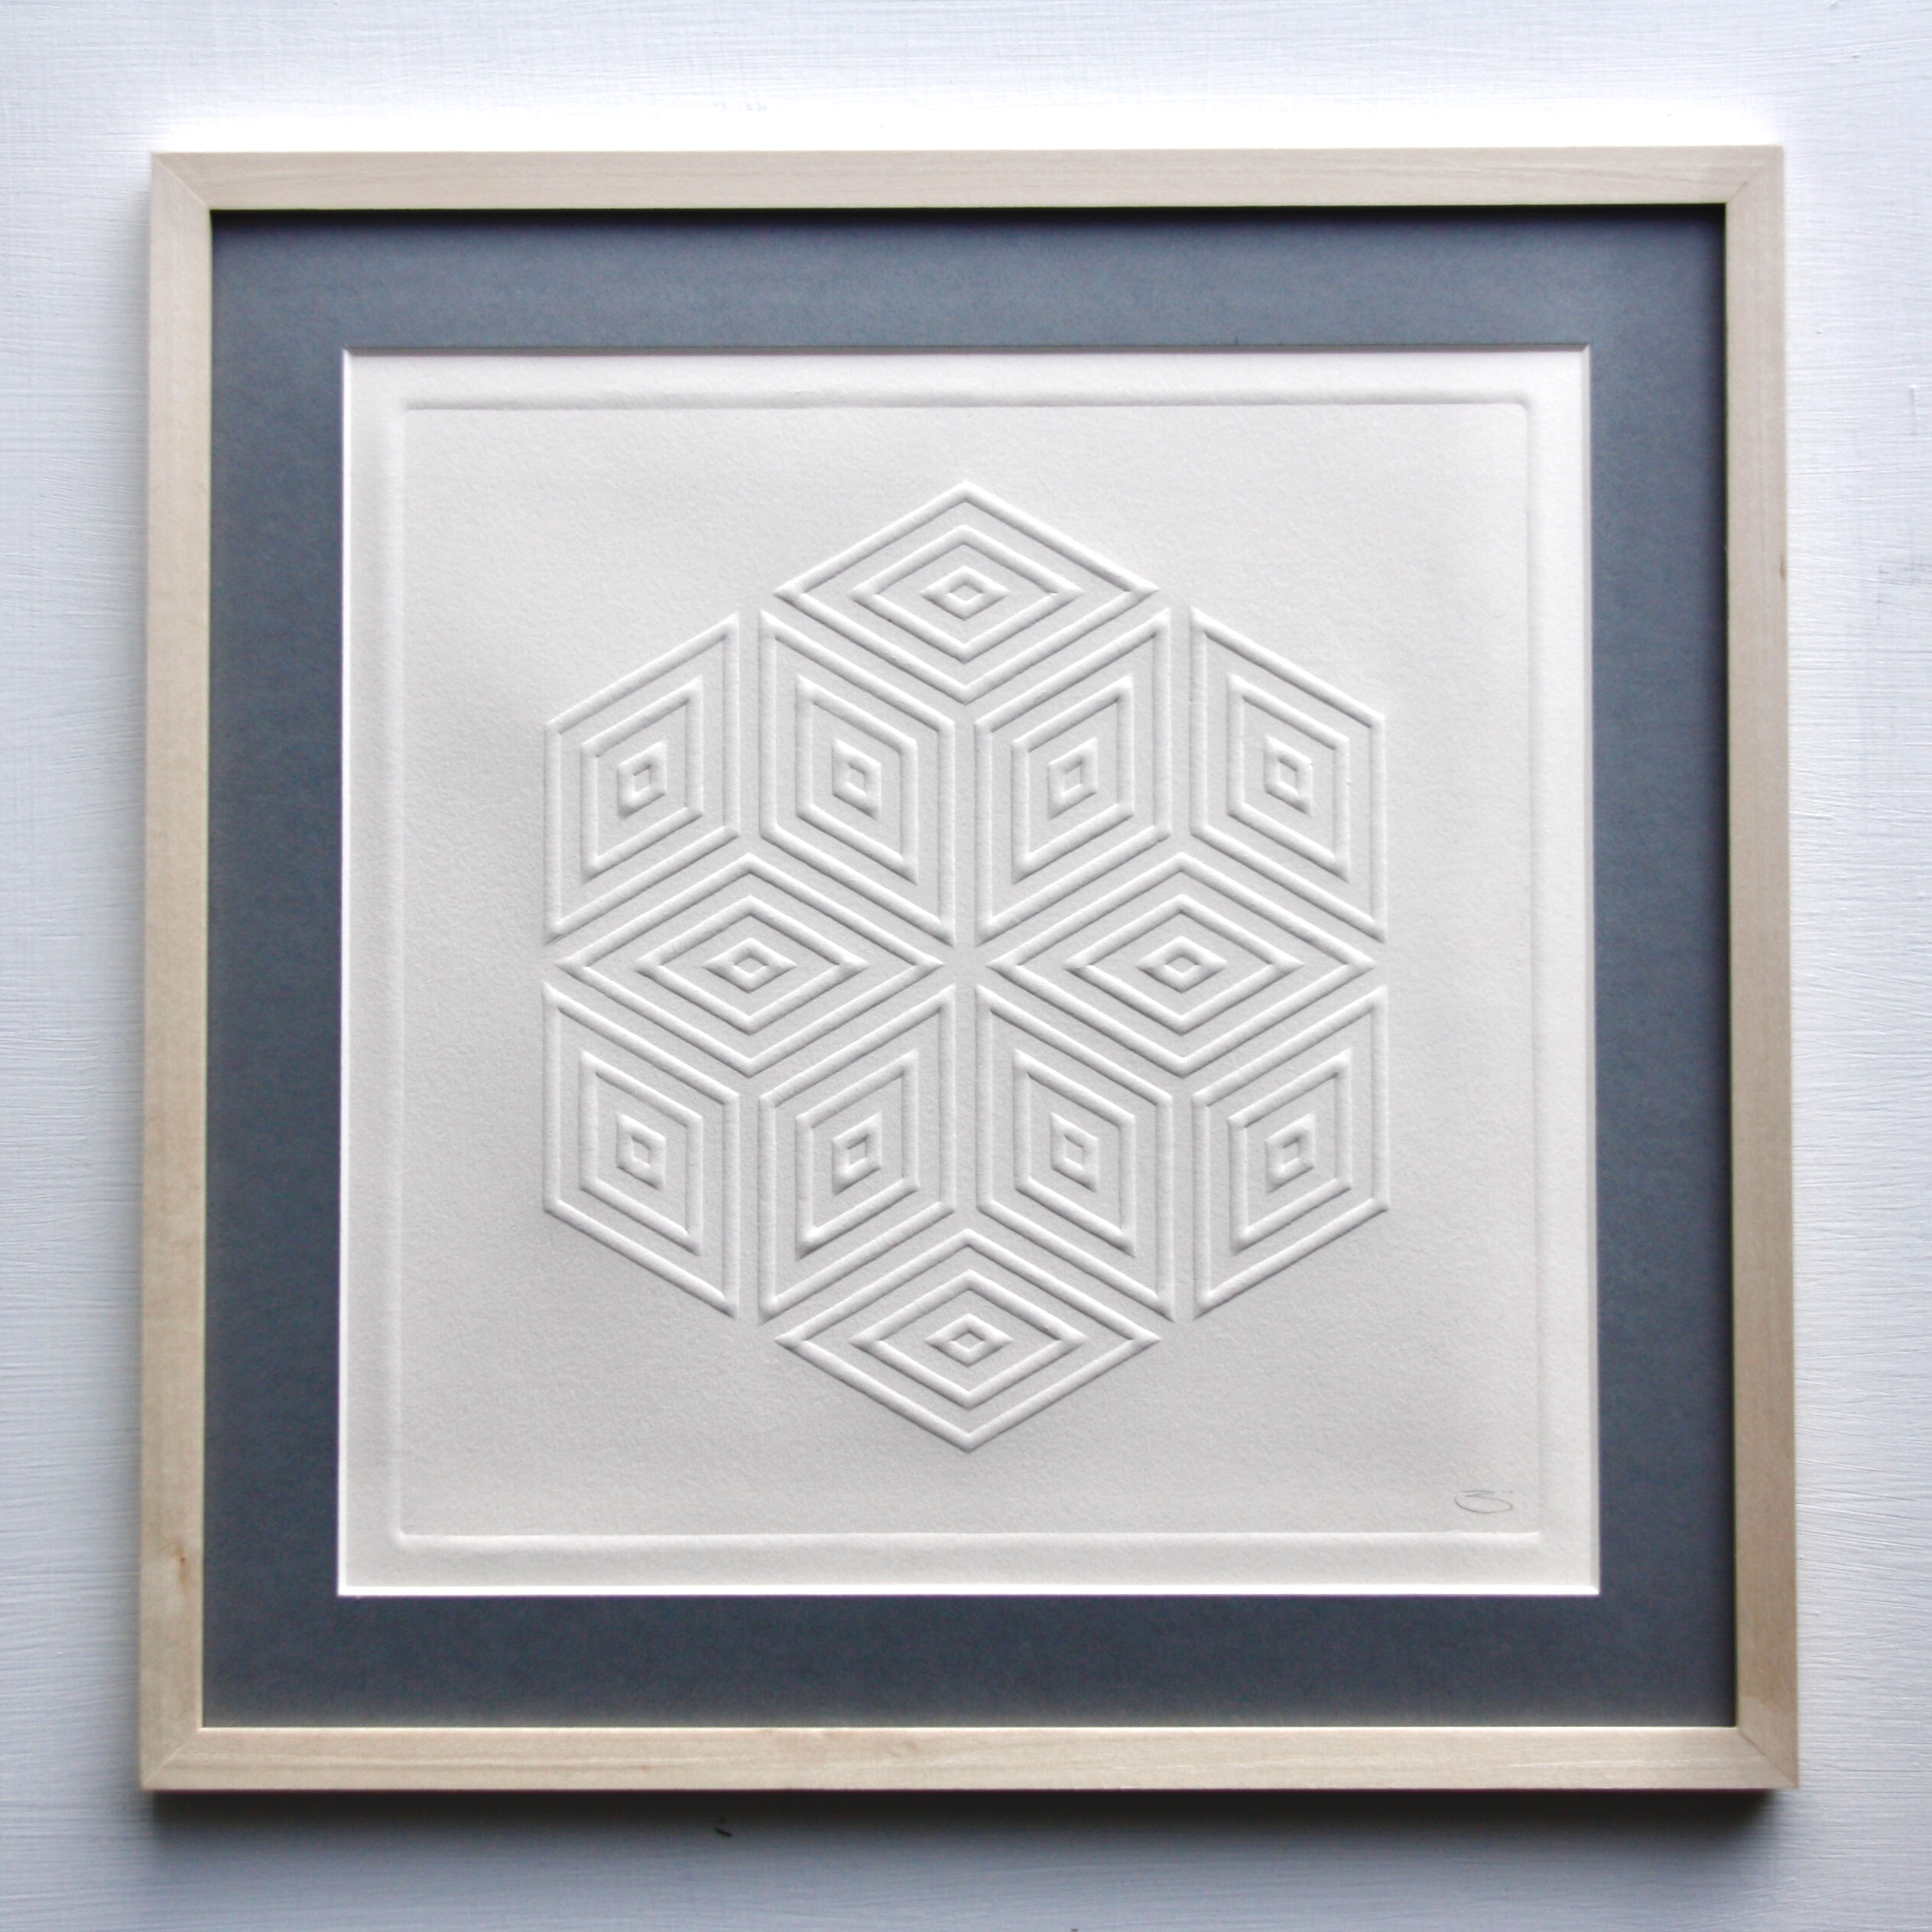 Paper pressed into the stone carving to make a raised embossing. Pattern is a geometric shape based on a diamond